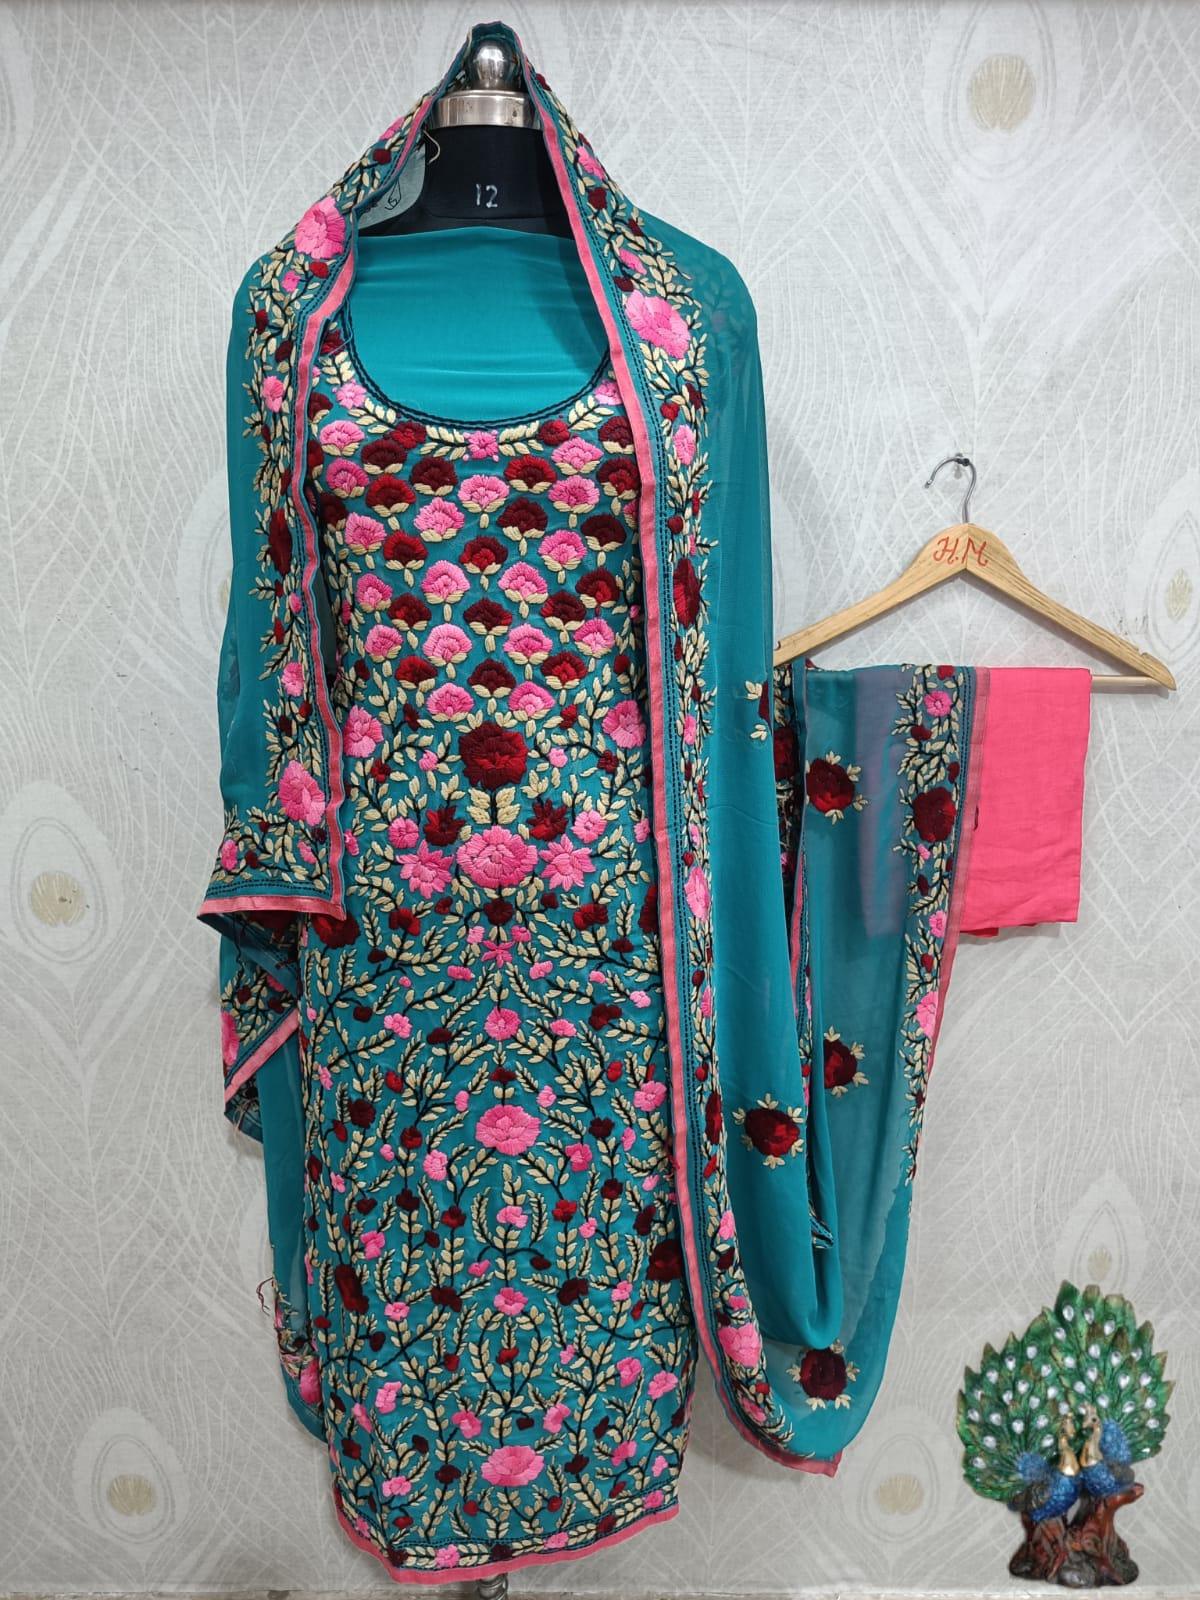 Blue Special Georgette Phulkari Suit with Beautiful Floral Embroidery Shopping Online - Inayakhan Shop 